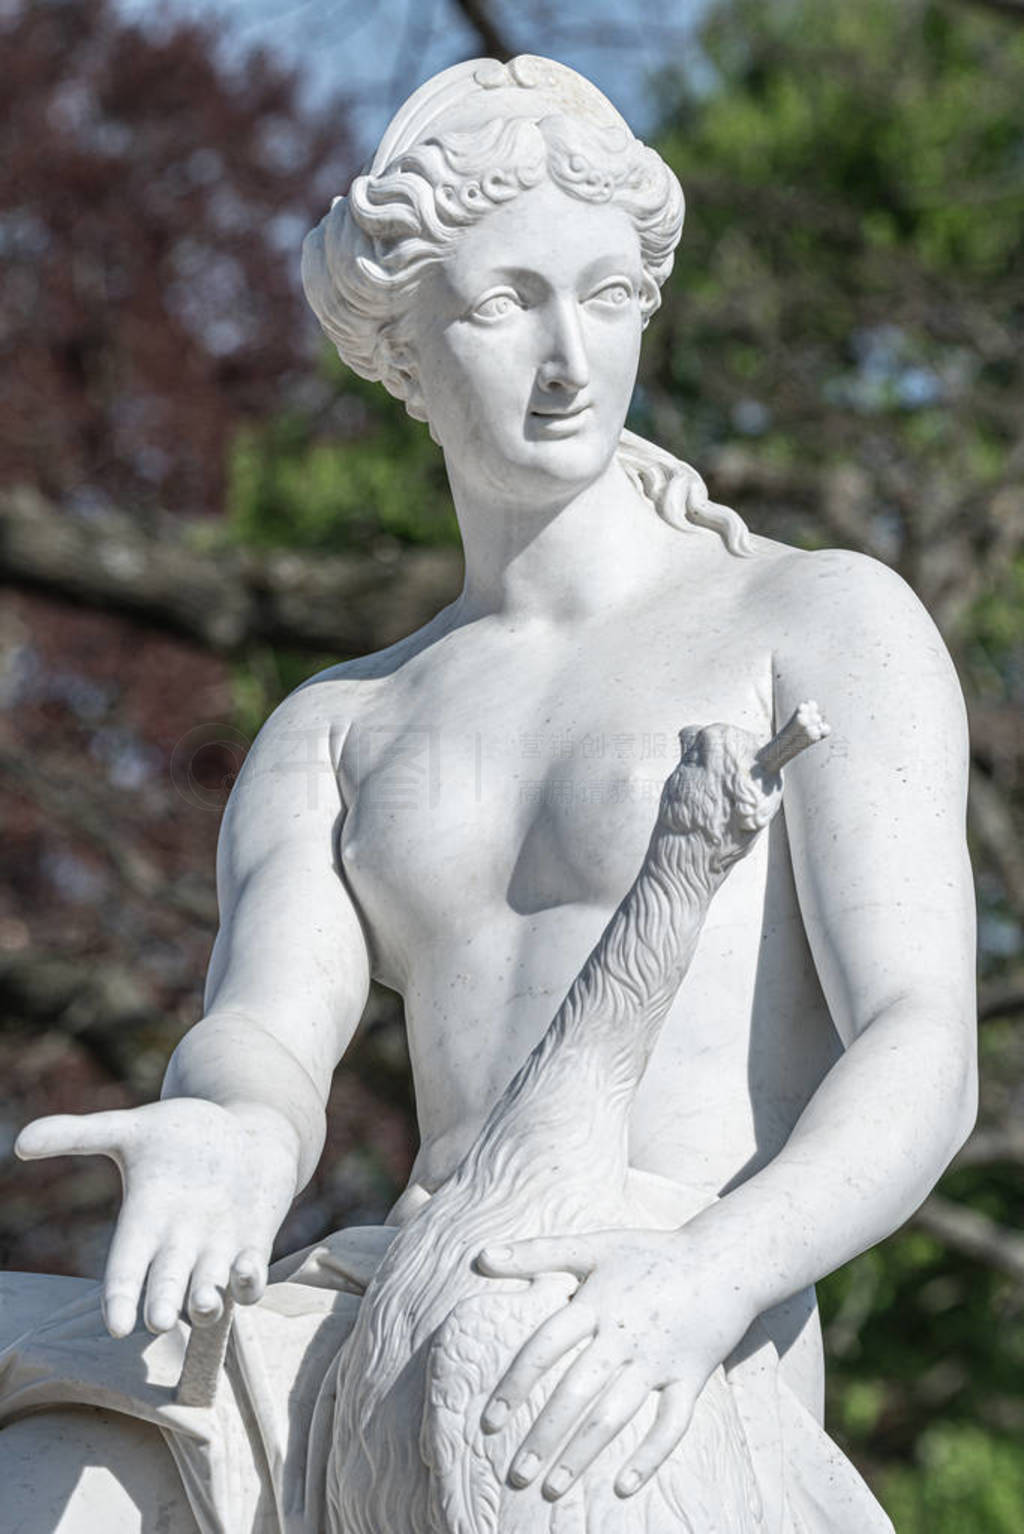 Old statue of a sensual naked Renaissance Era woman in the park